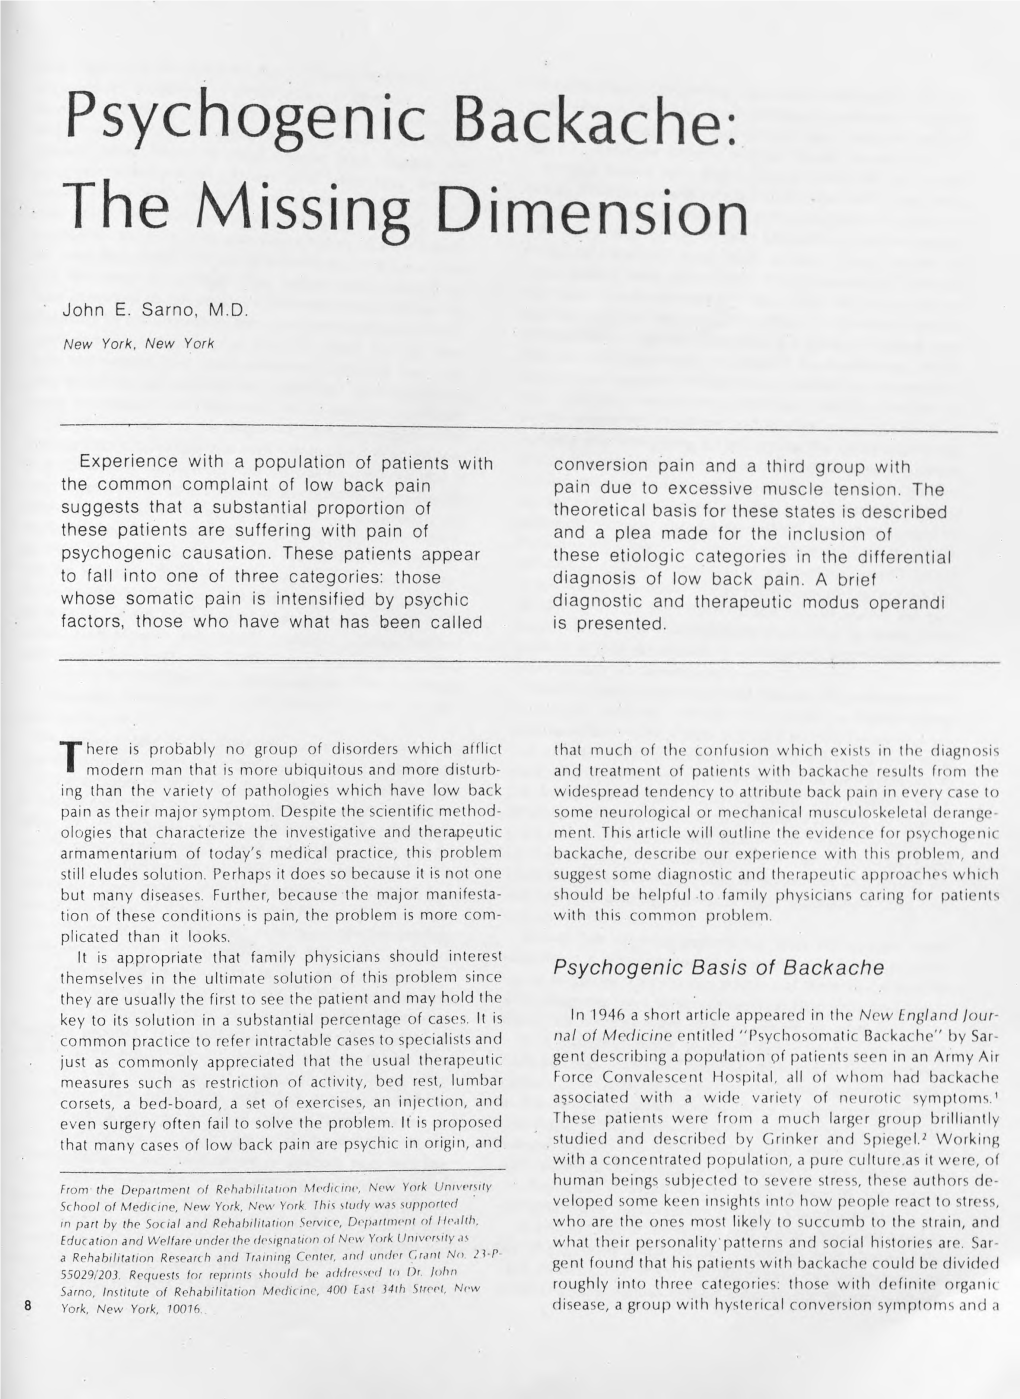 Psychogenic Backache: the Missing Dimension